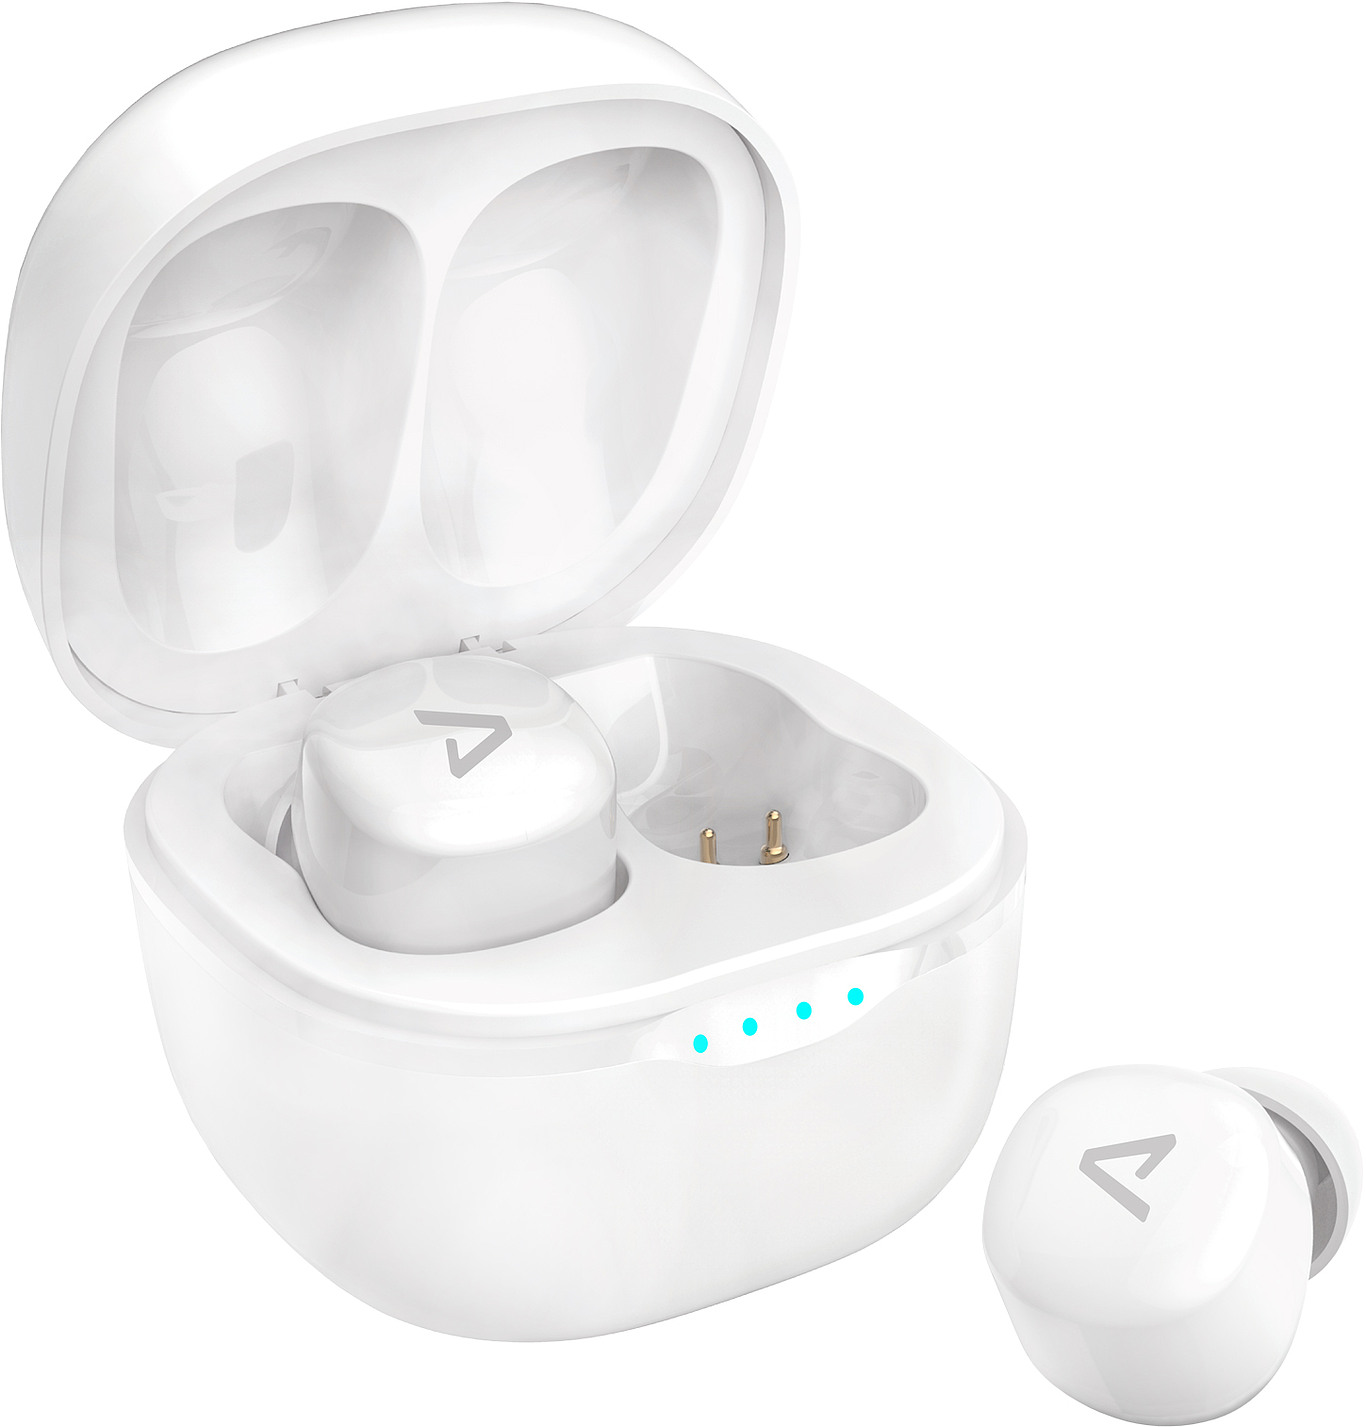 LAMAX Dots2 Touch White - The smallest earphones on the market that fit everyone